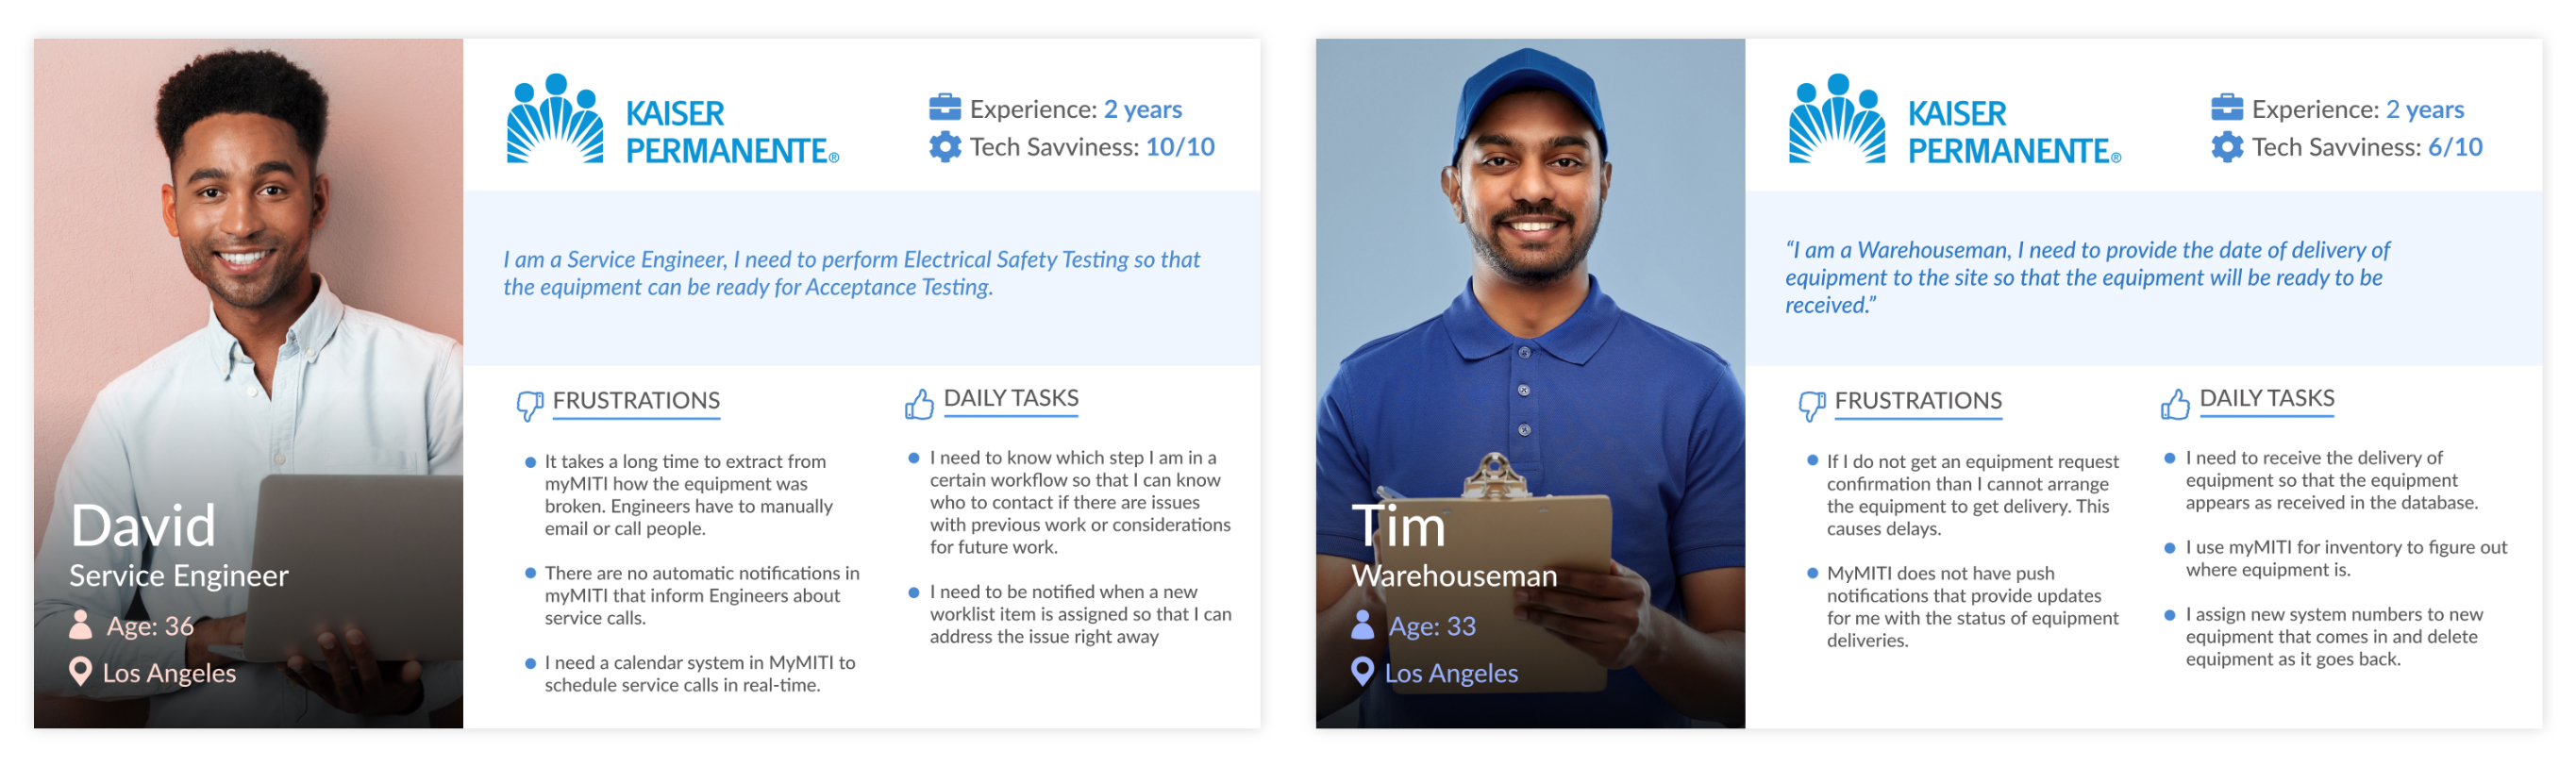 Description and image of the service engineer and warehouse manager